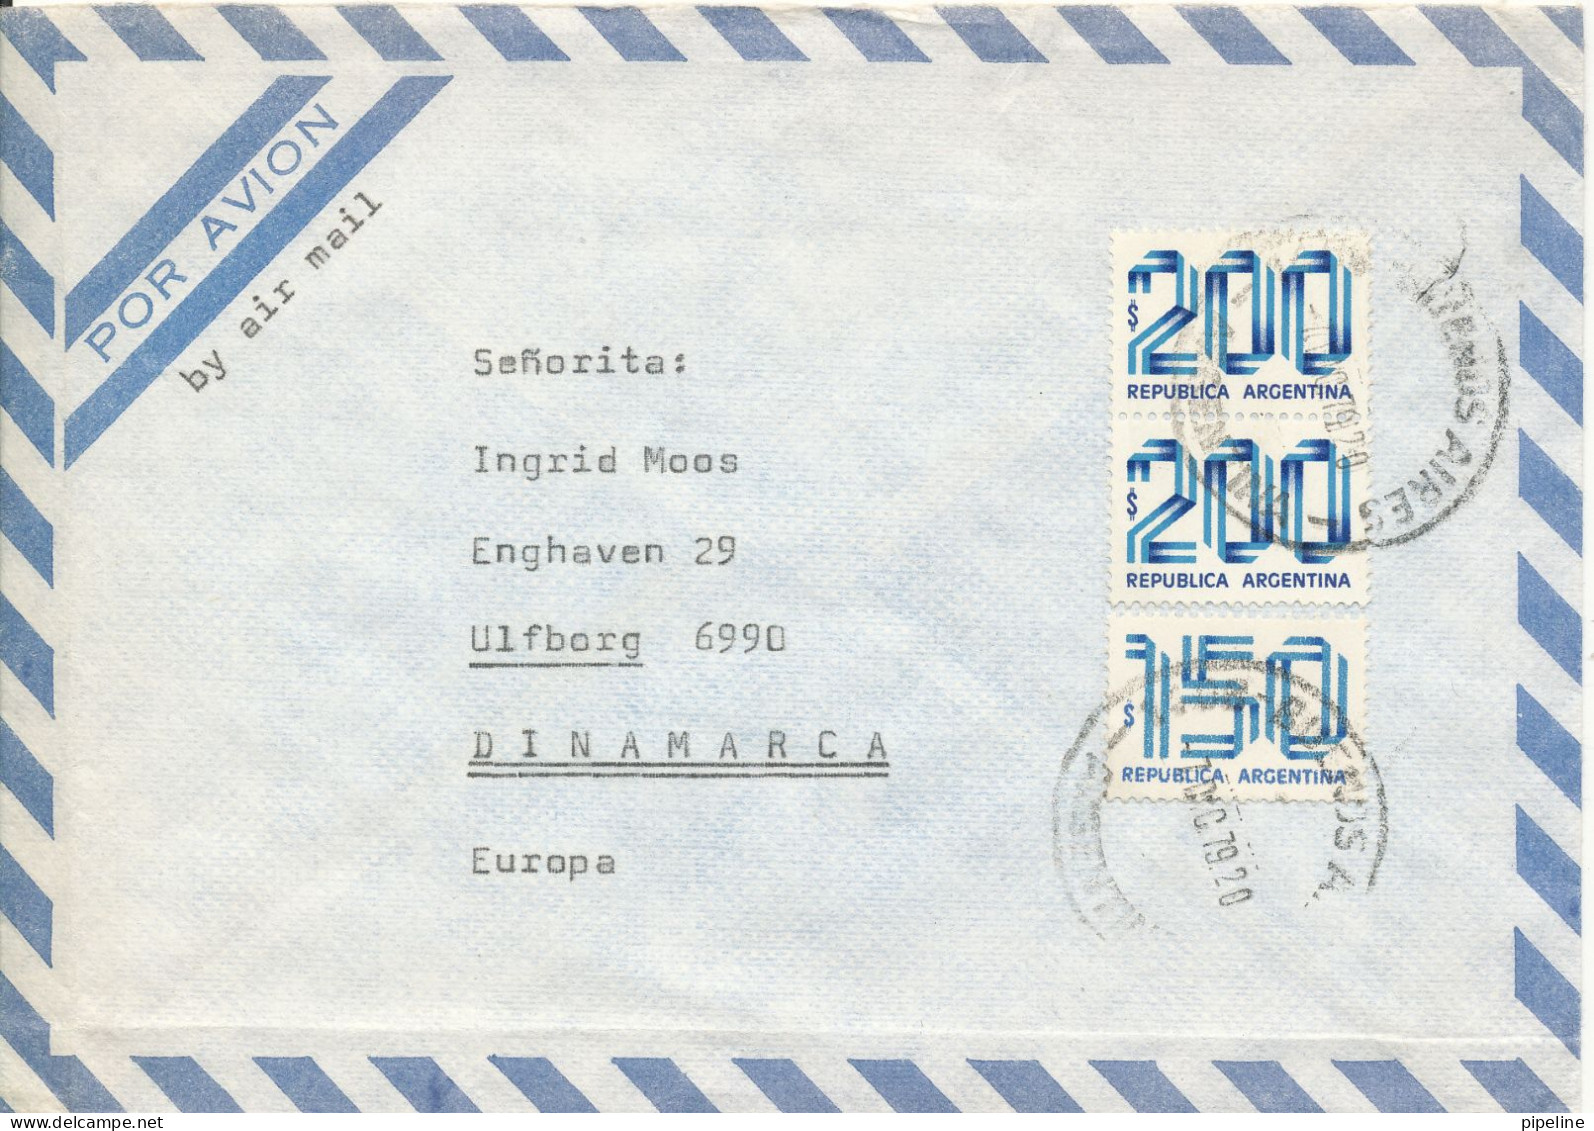 Argentina Air Mail Cover Sent To Denmark 7-12-1979 - Luftpost